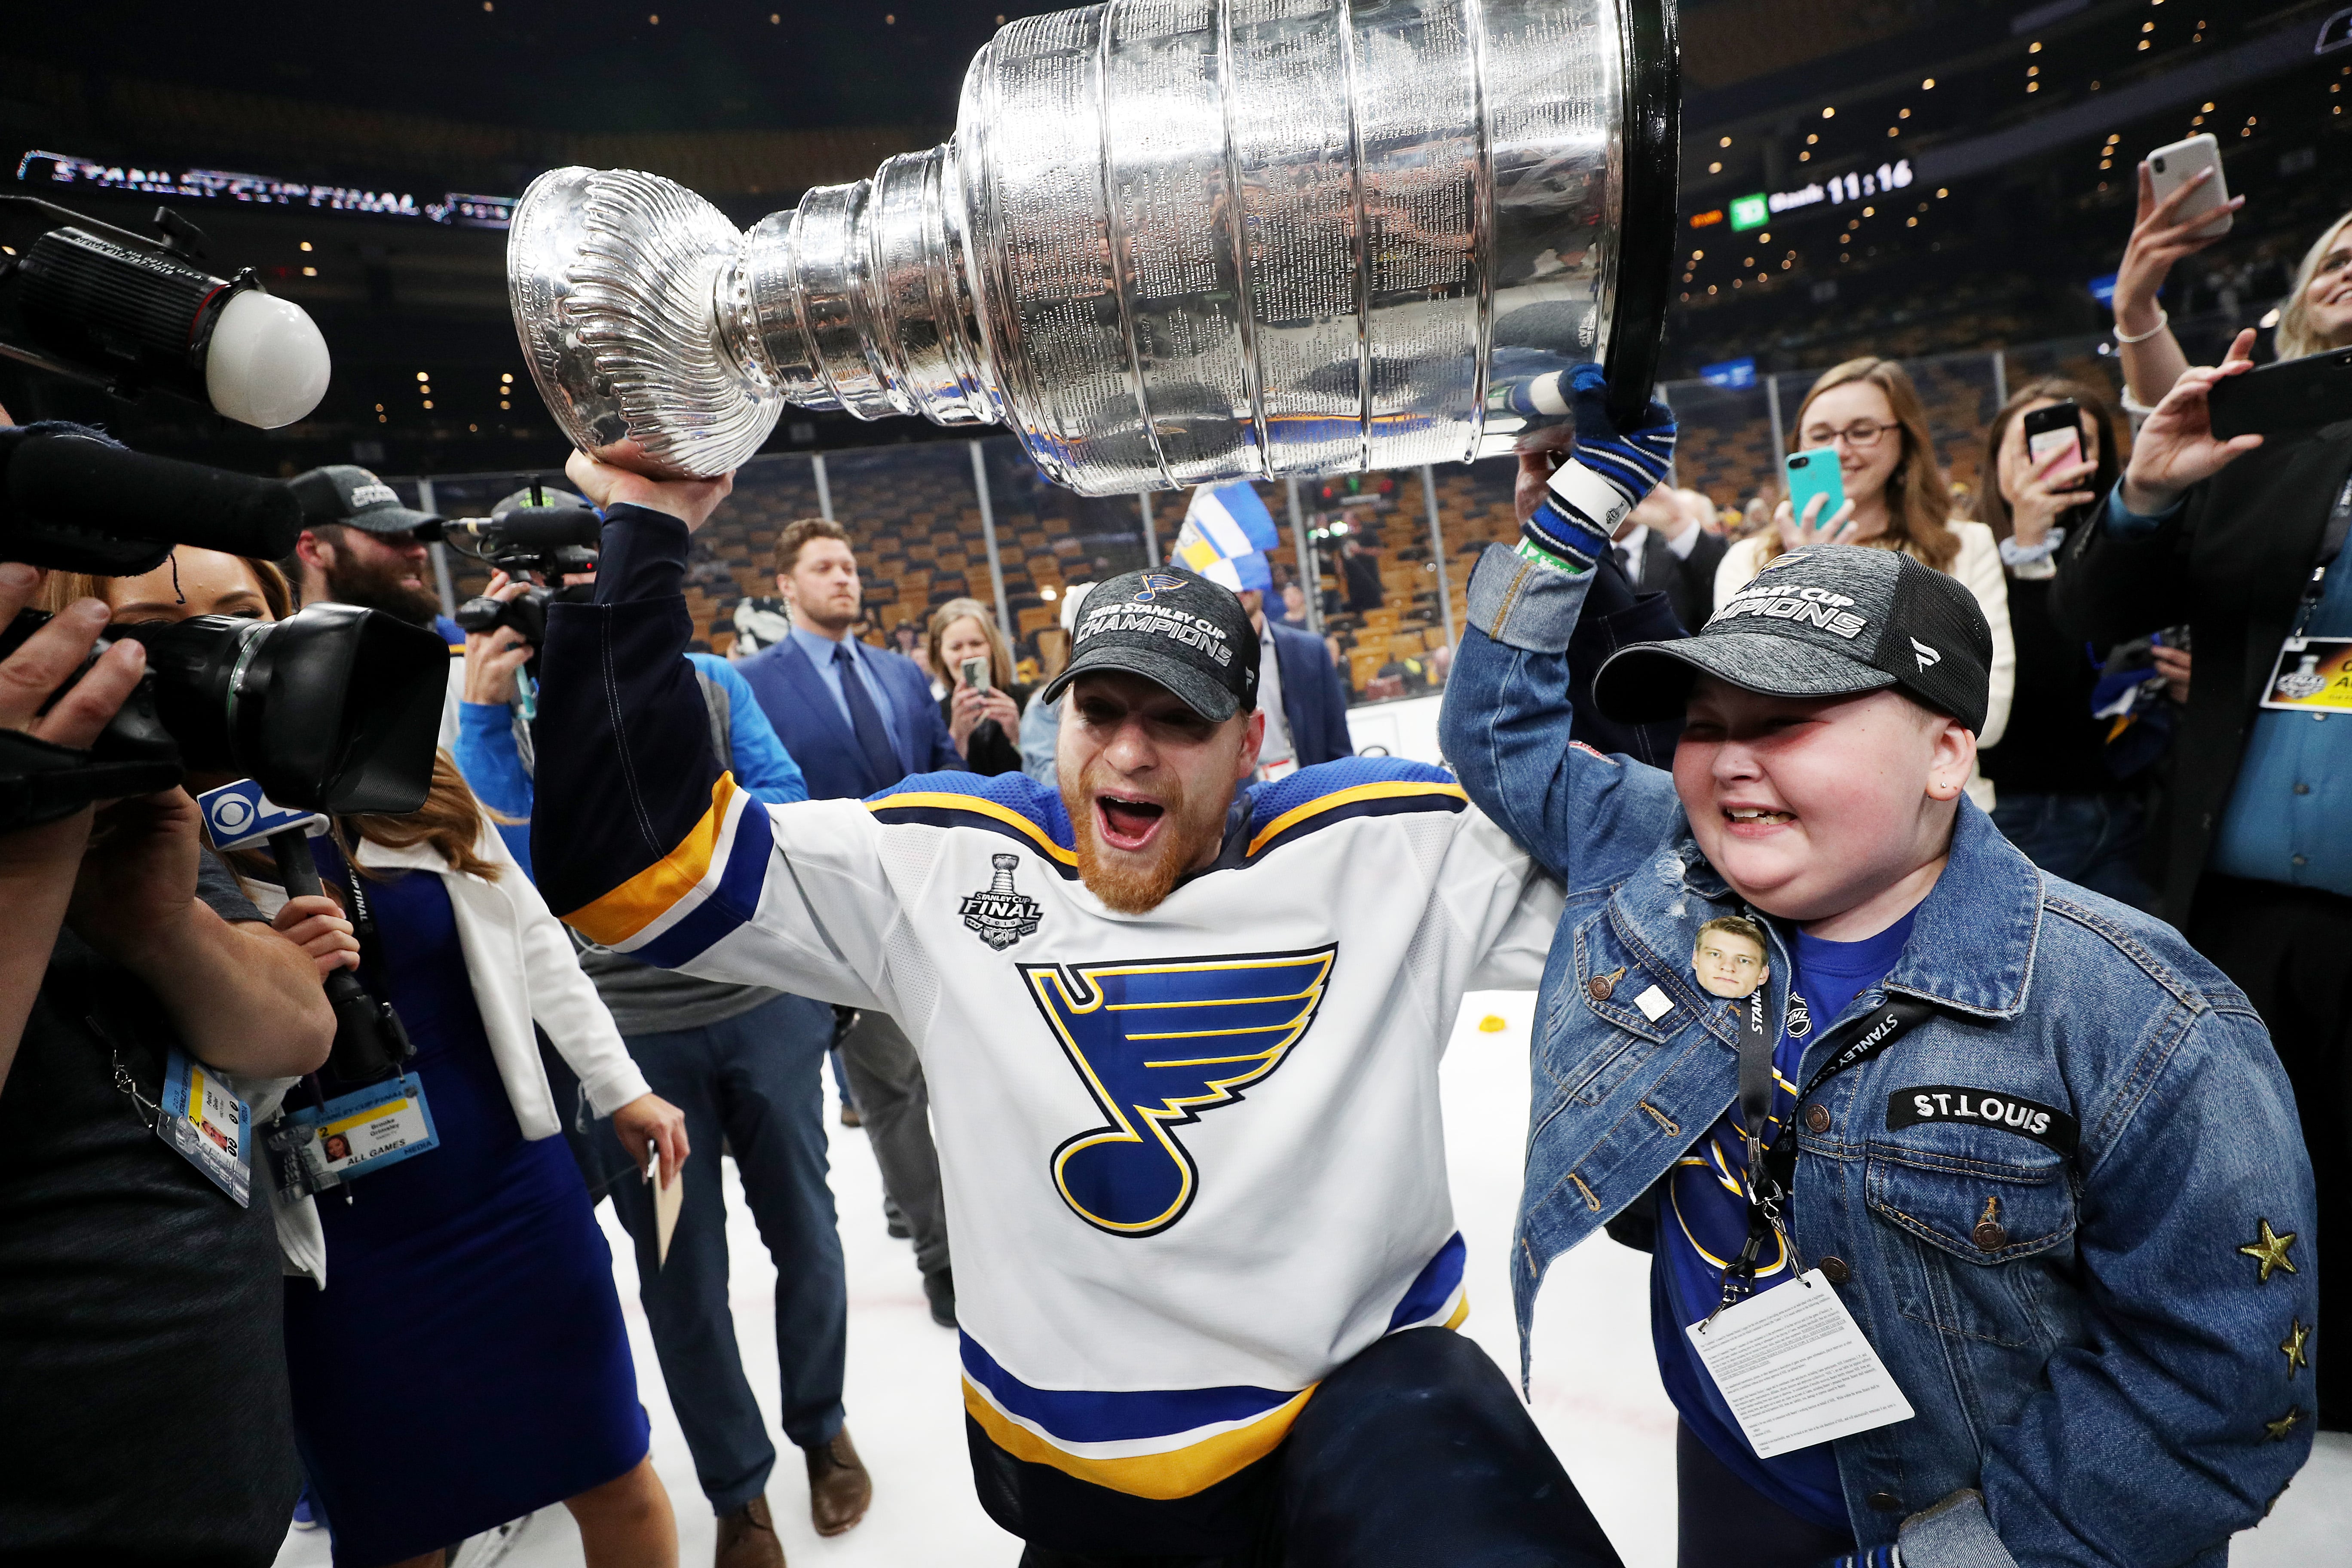 11-year-old St. Louis Blues superfan with rare illness given